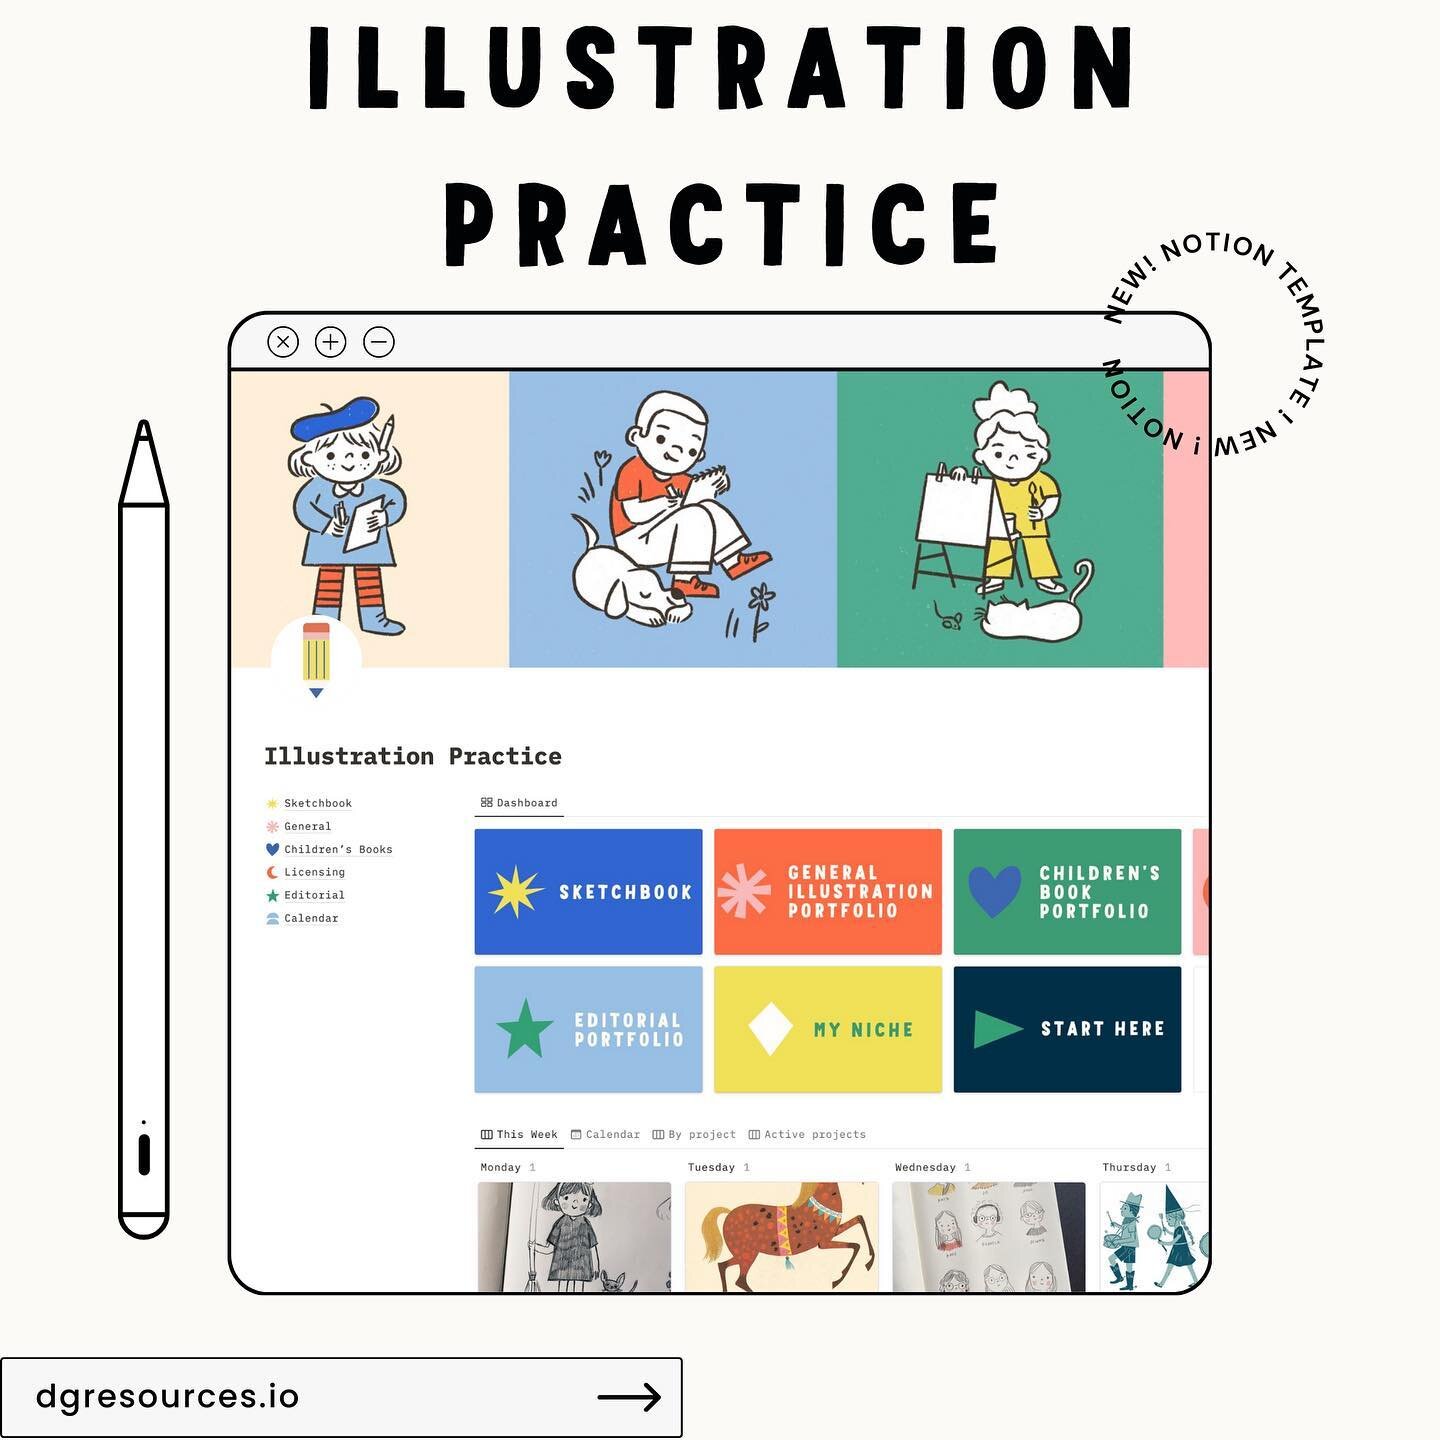 Building an illustration portfolio can be a challenge, but we're here to help! Introducing our new Notion template - the Illustration Practice. With 31 targeted projects and over 400 illustration prompts, our template is designed to help you expand y